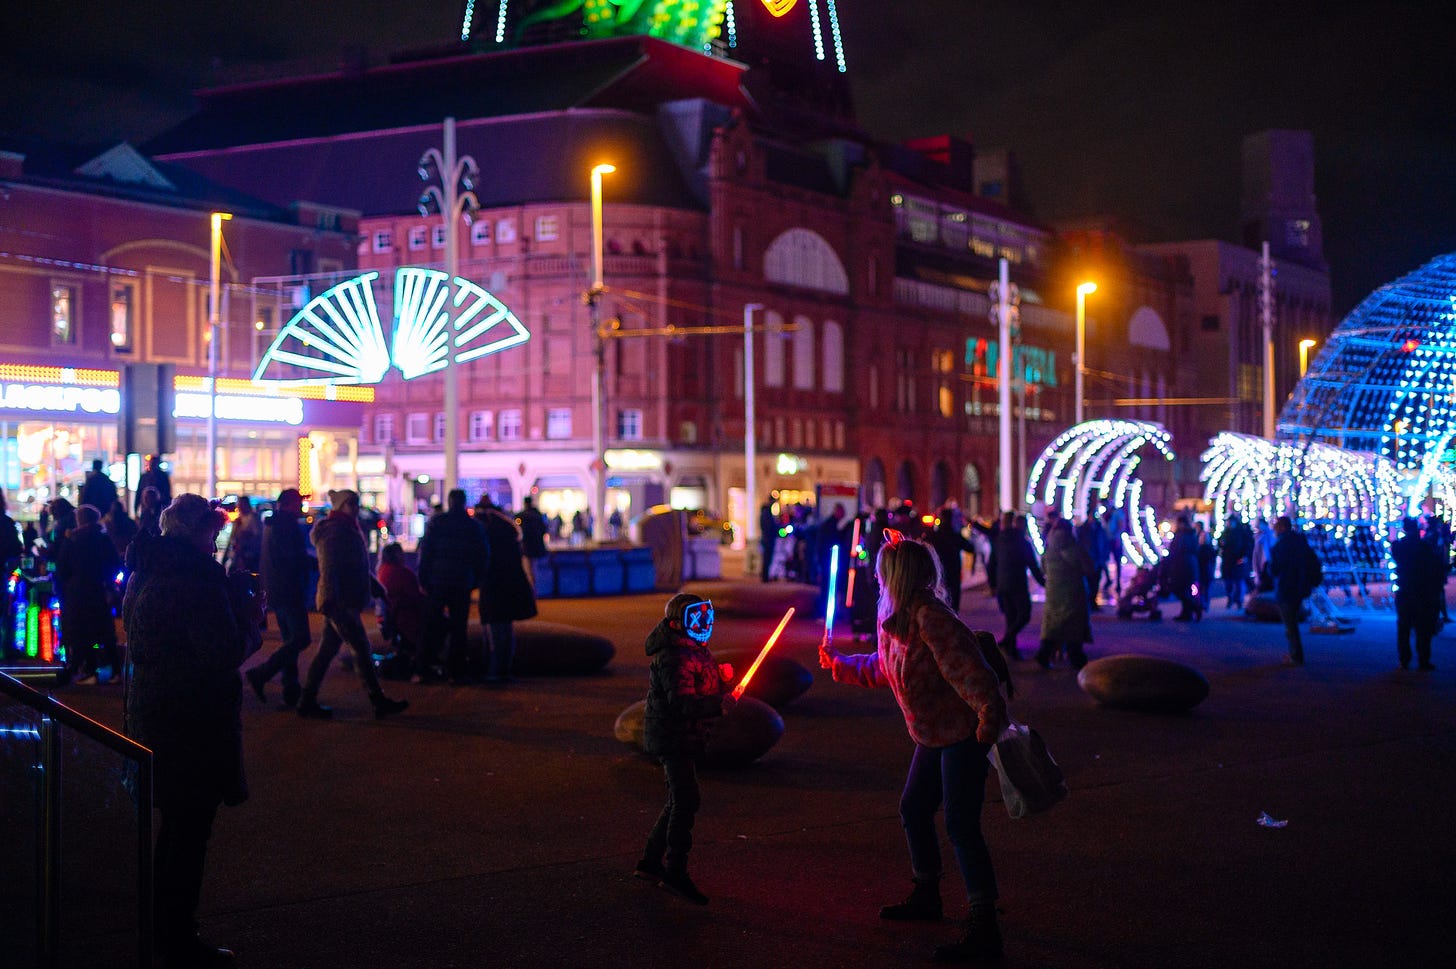 A kid engages in a lightsaber battle with a grownup at night during Blackpool Illuminations.